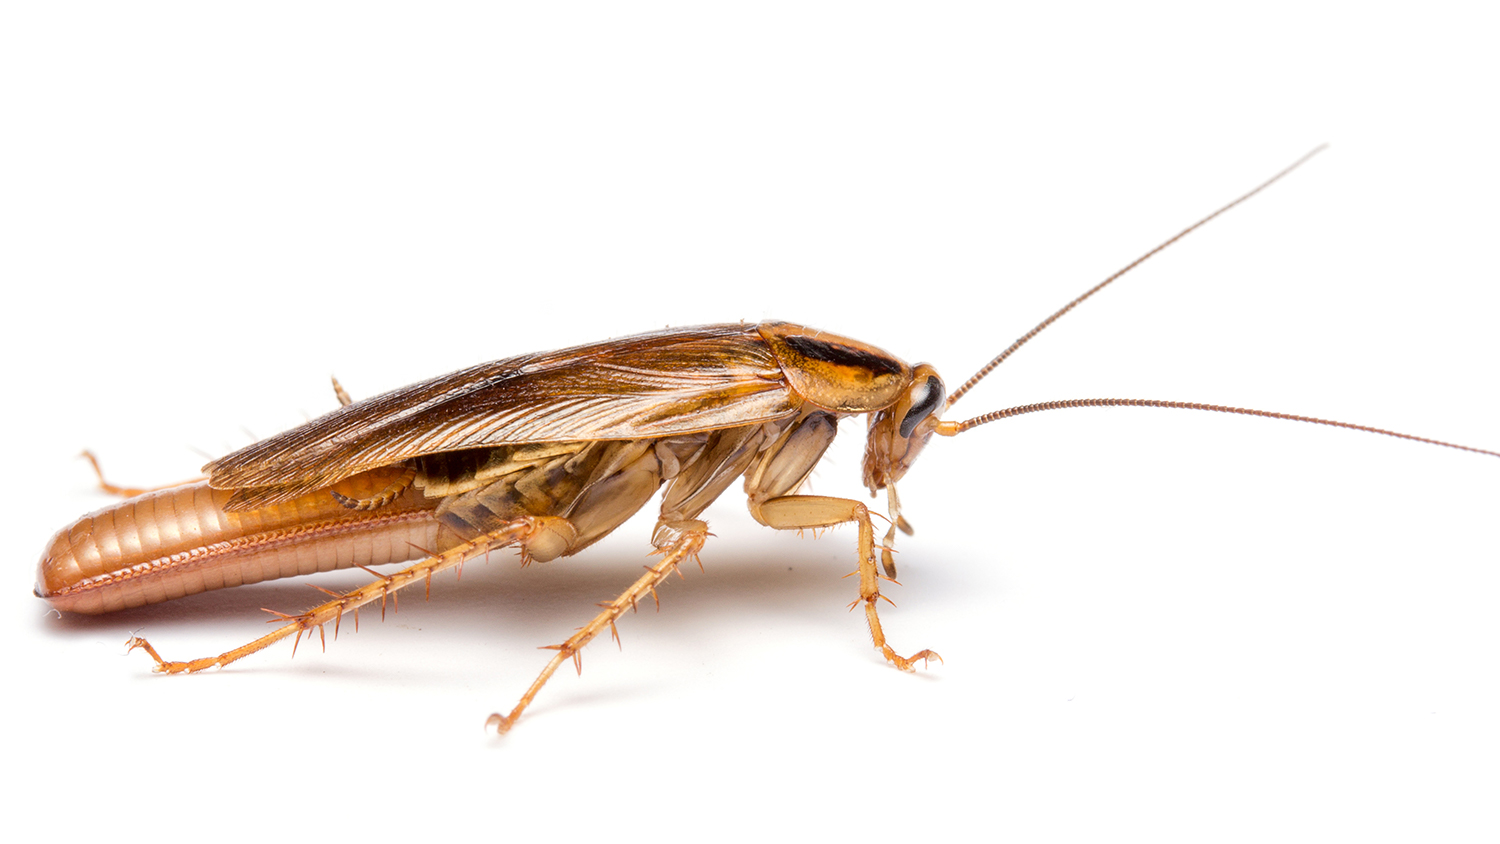 cockroach close up against white background